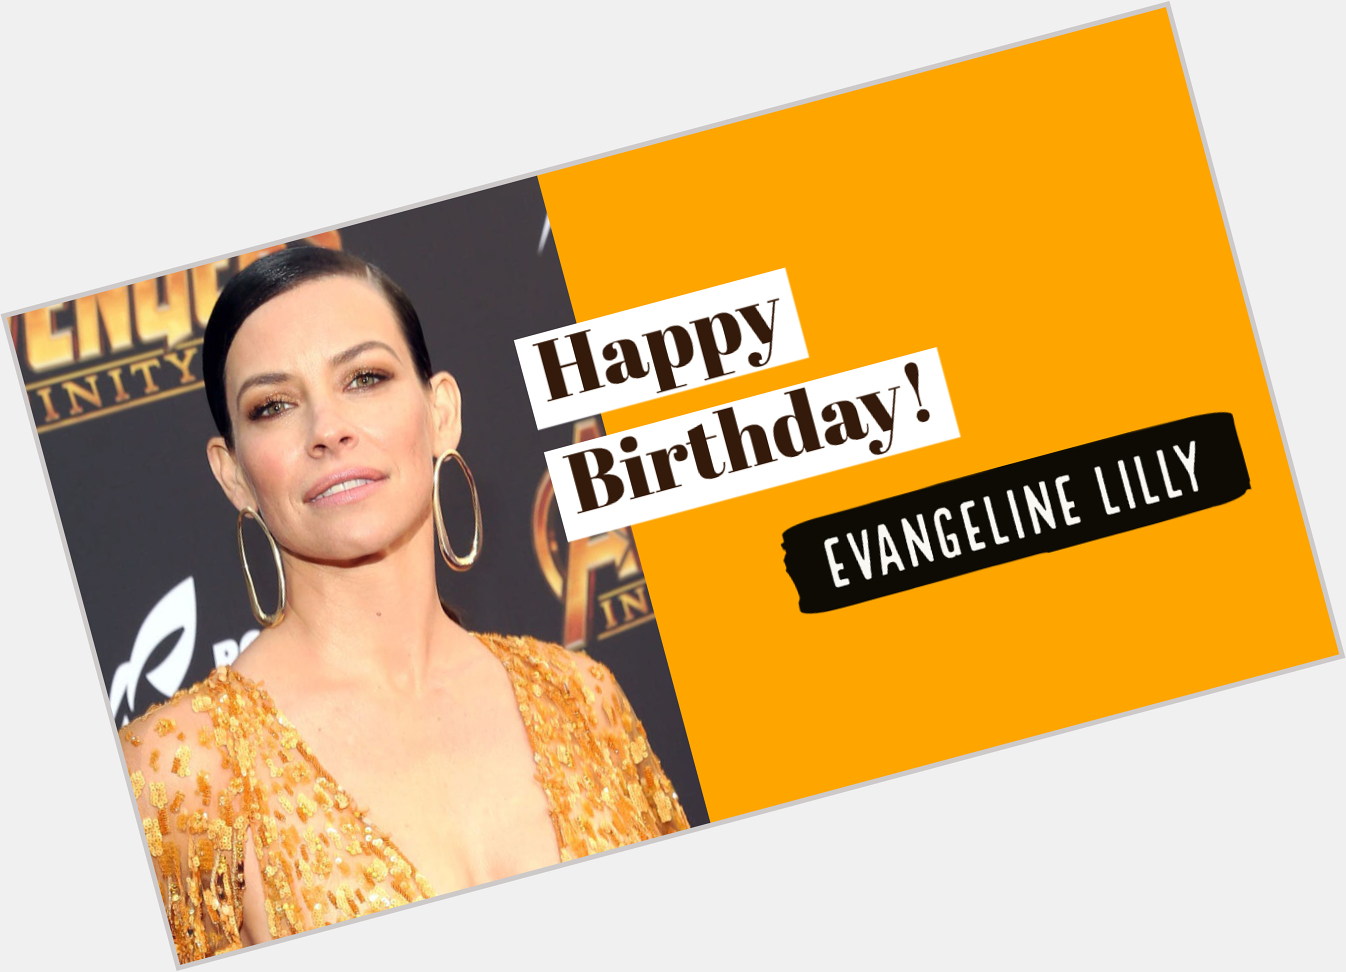 Happy Birthday to the Wasp herself, Evangeline Lilly!  